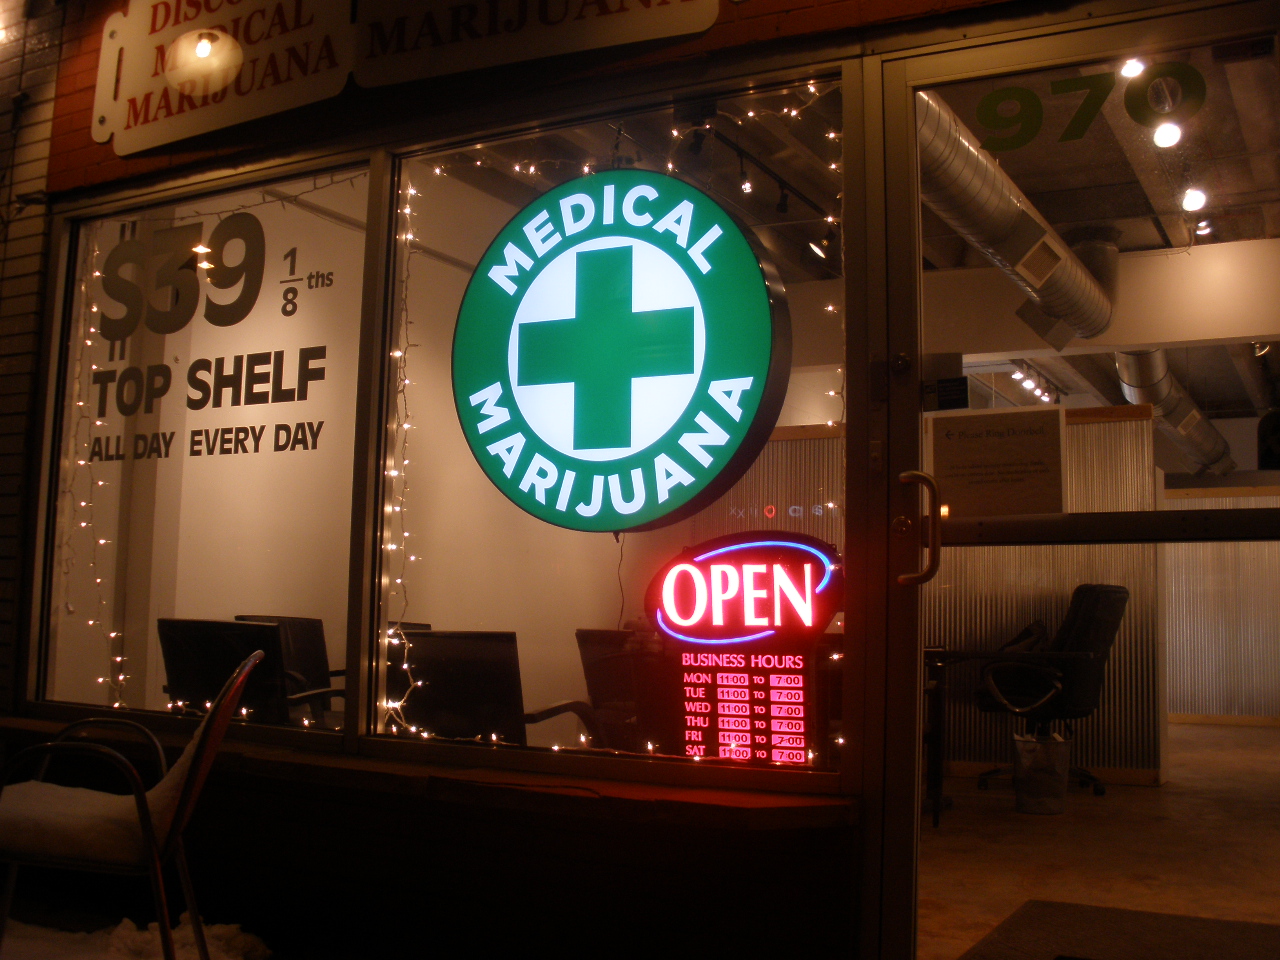 Medical marijuana is expected to rise globally, paving the way for new small businesses